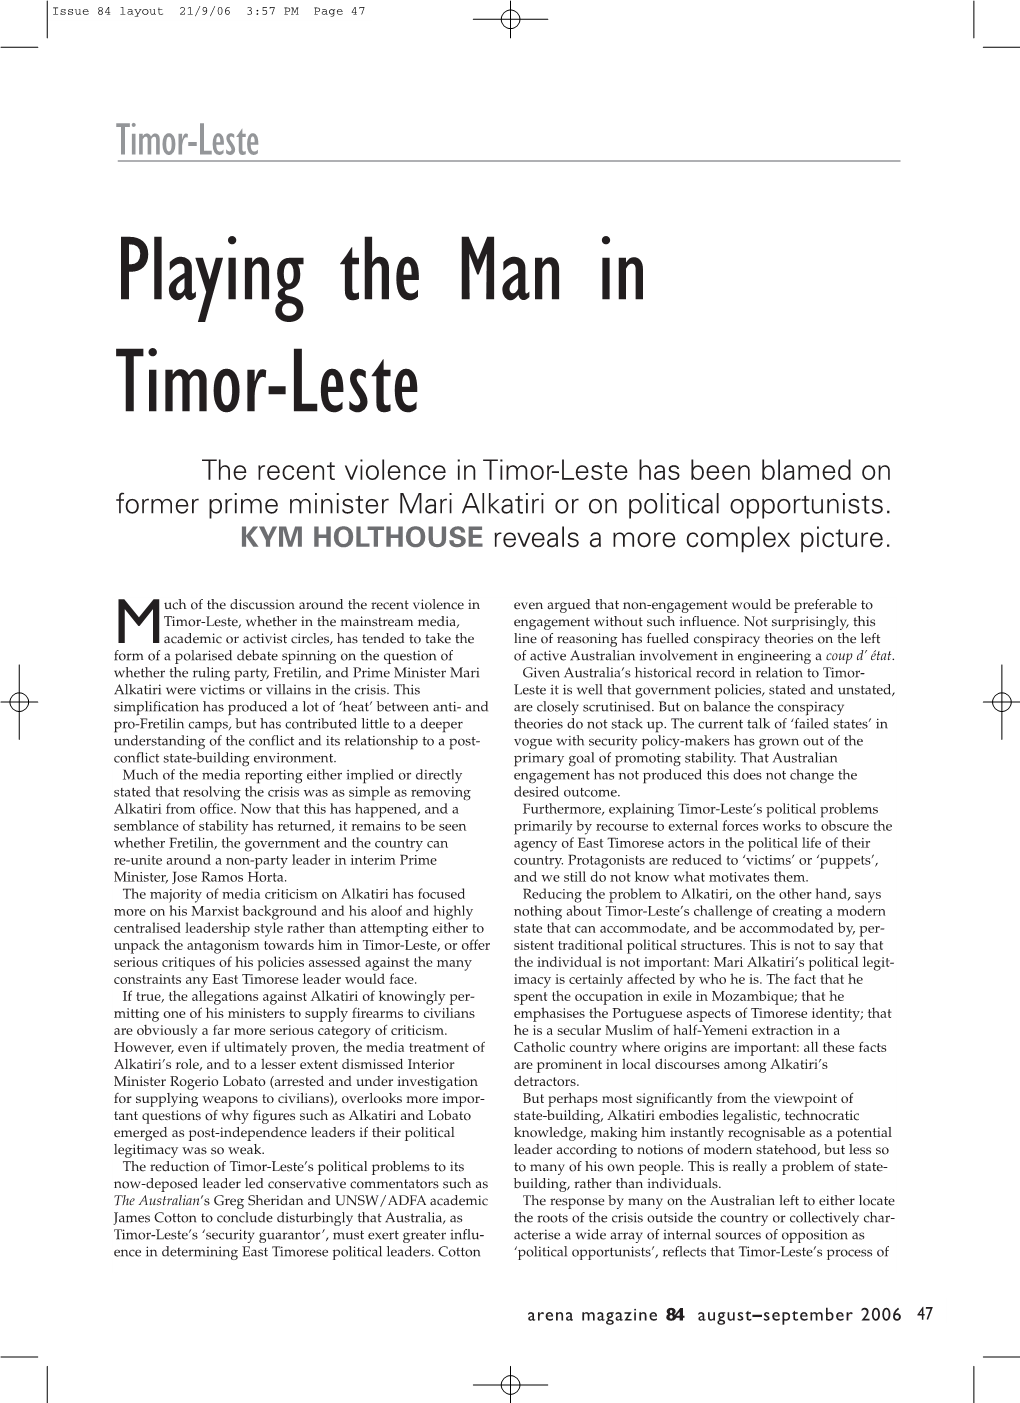 Playing the Man in Timor-Leste the Recent Violence in Timor-Leste Has Been Blamed on Former Prime Minister Mari Alkatiri Or on Political Opportunists